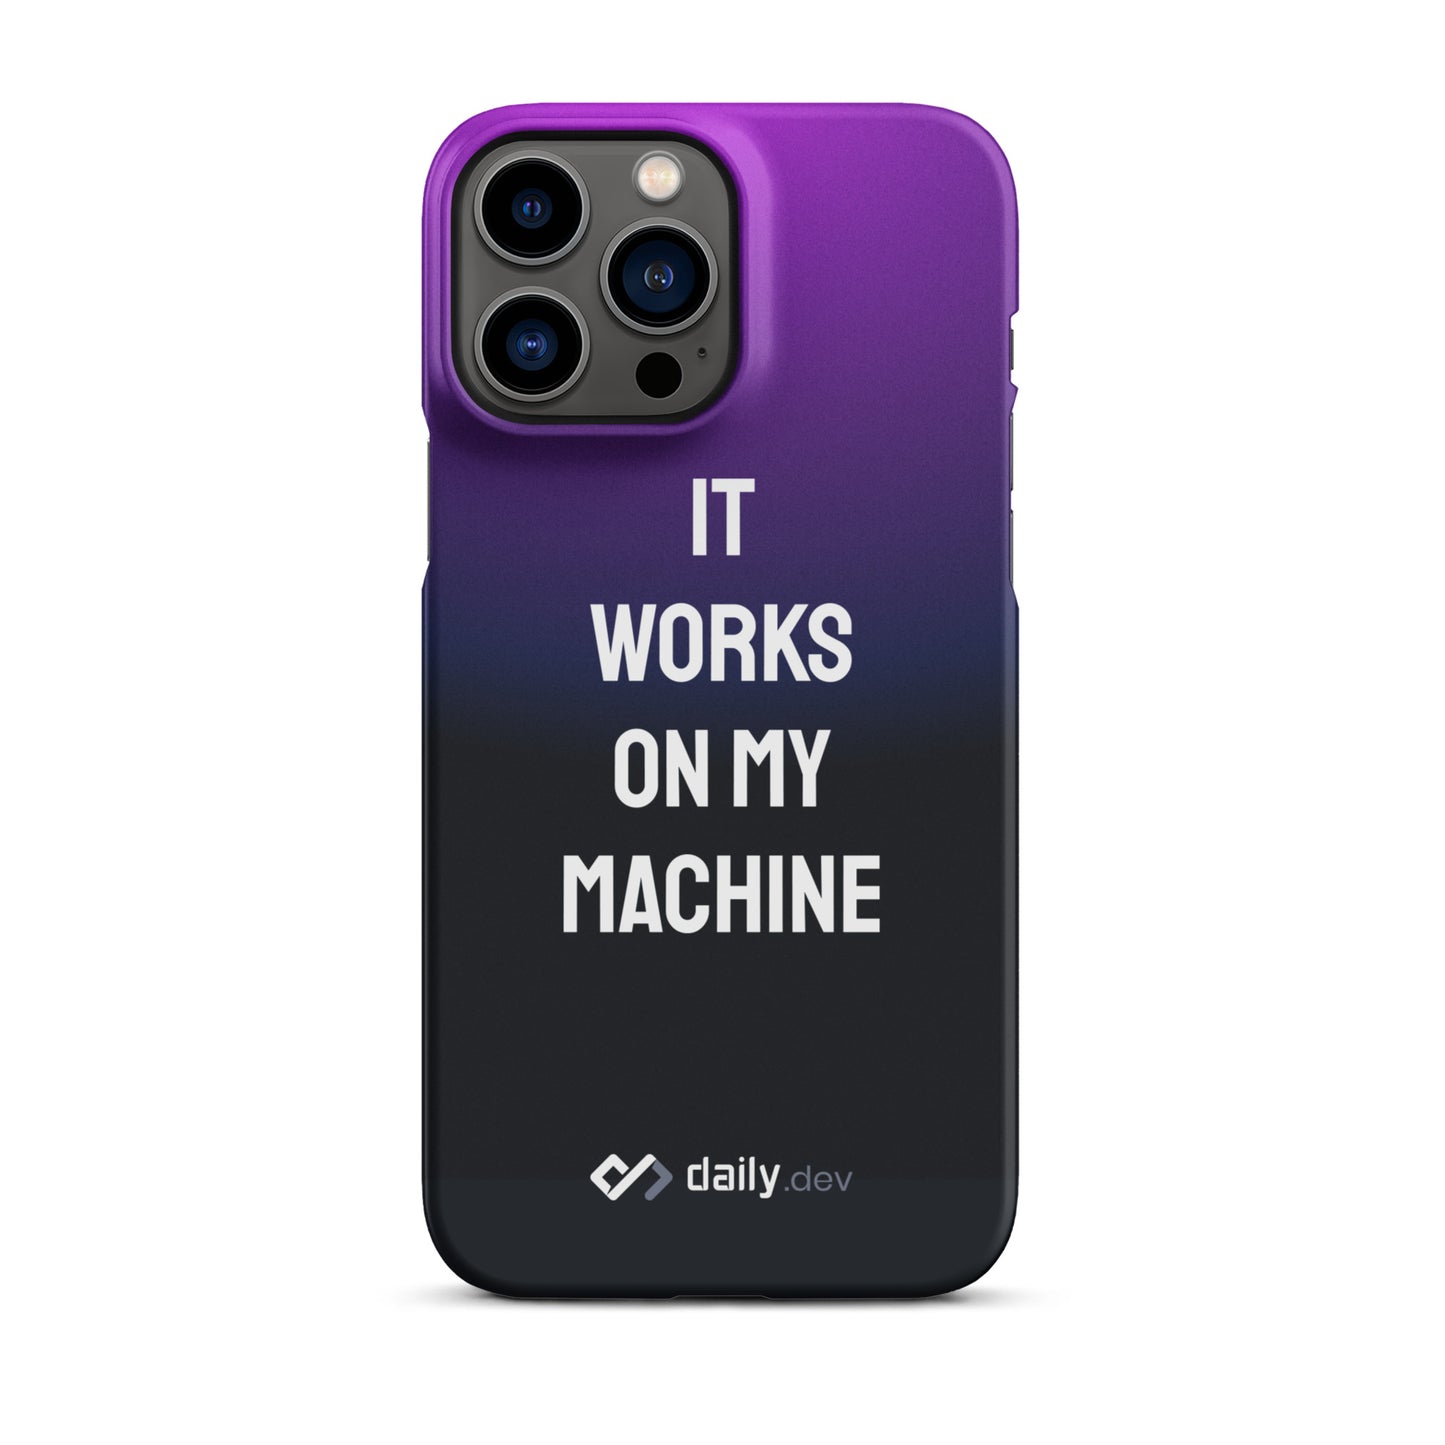 daily.dev Snap case for iPhone® - It works on my machine